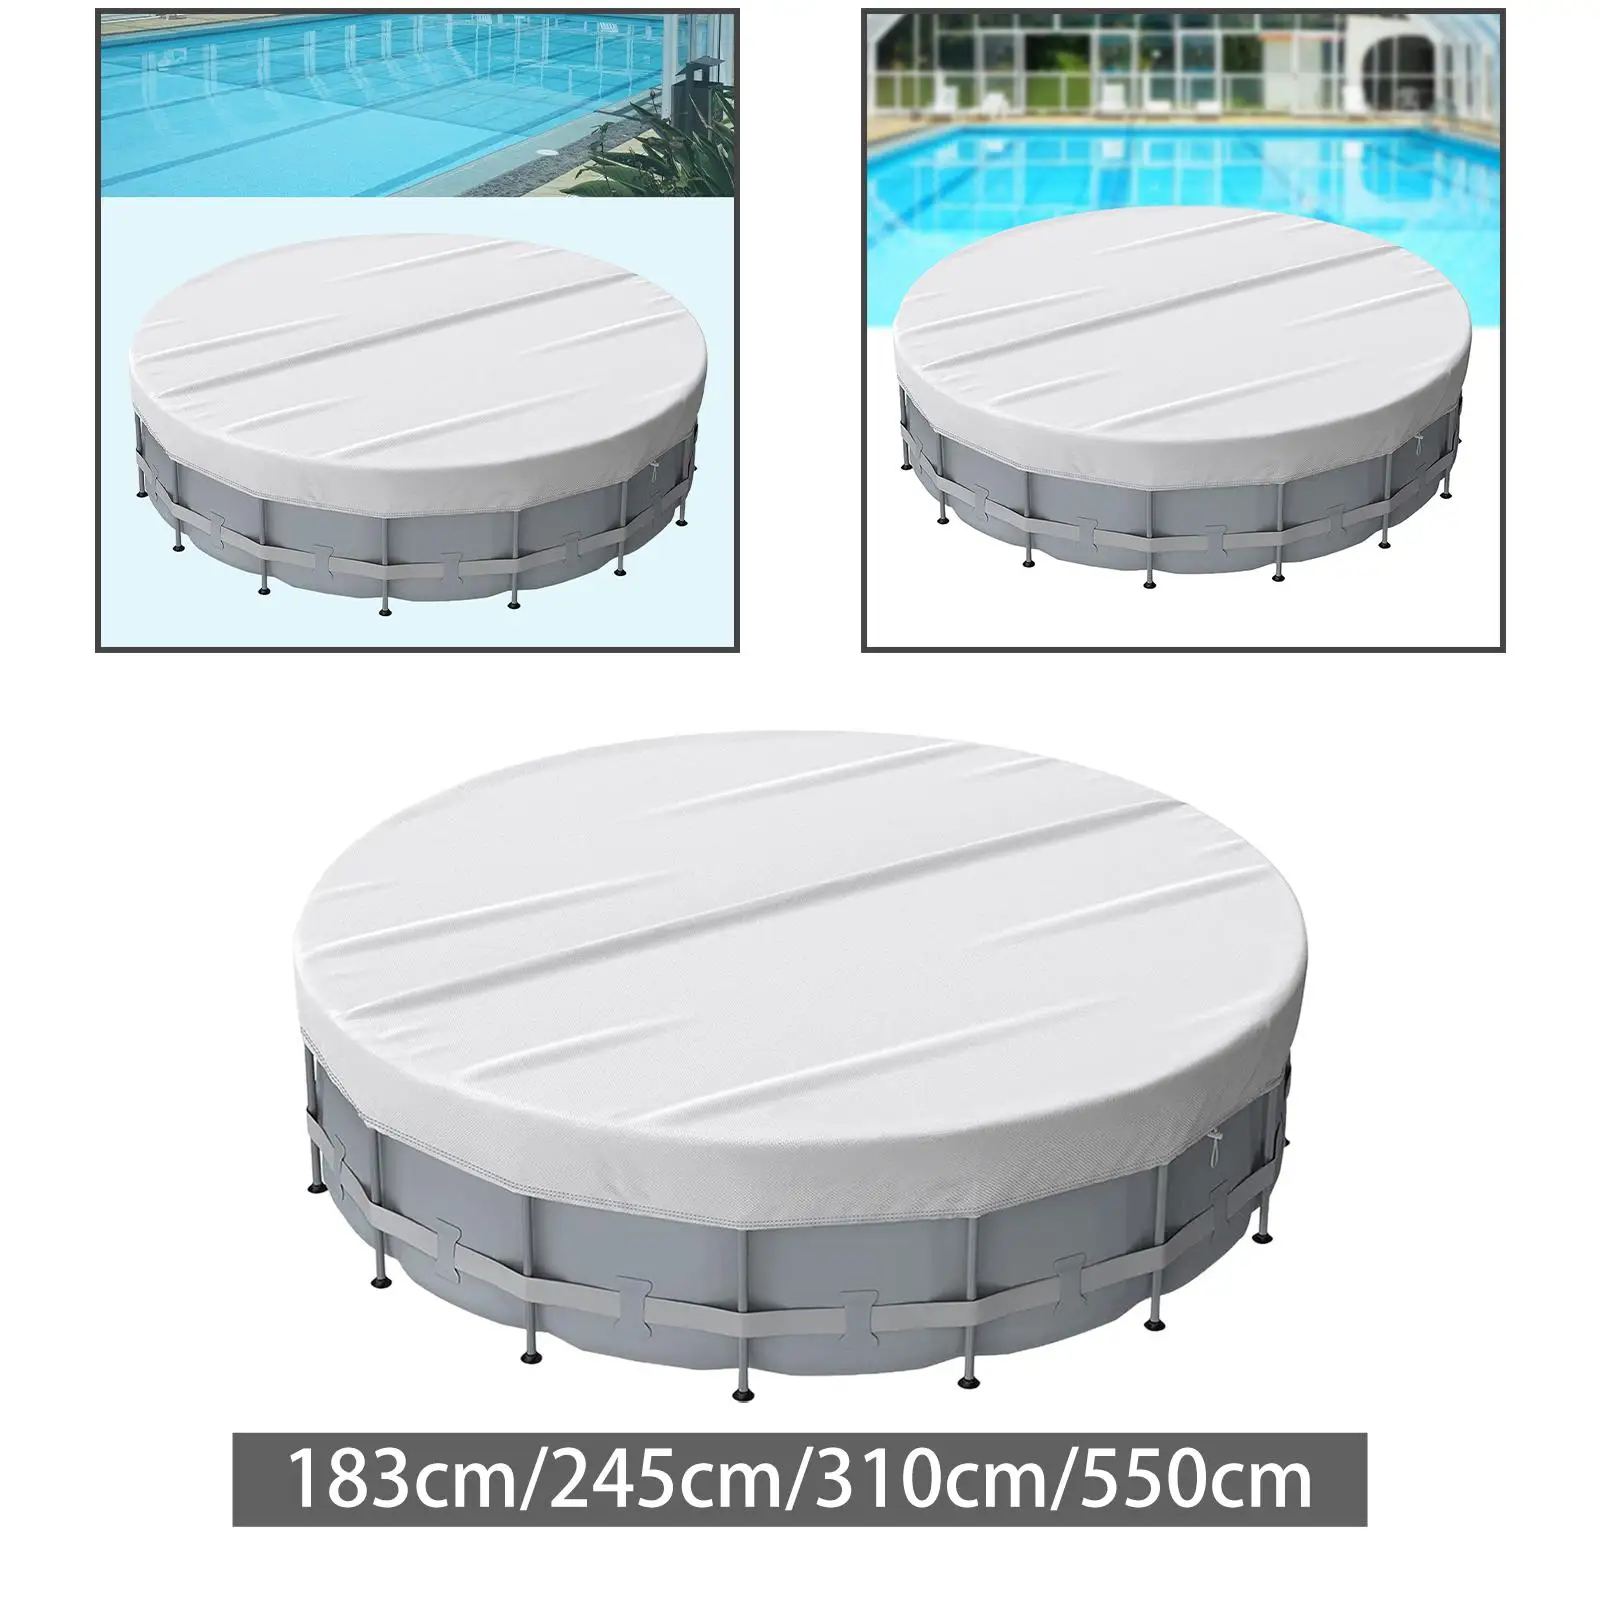 Swimming Pool Cover Hot Tub Cover Protector Circular above Ground Pool Cover for Bathtub Garden Patio Frame Swimming Pools SPA